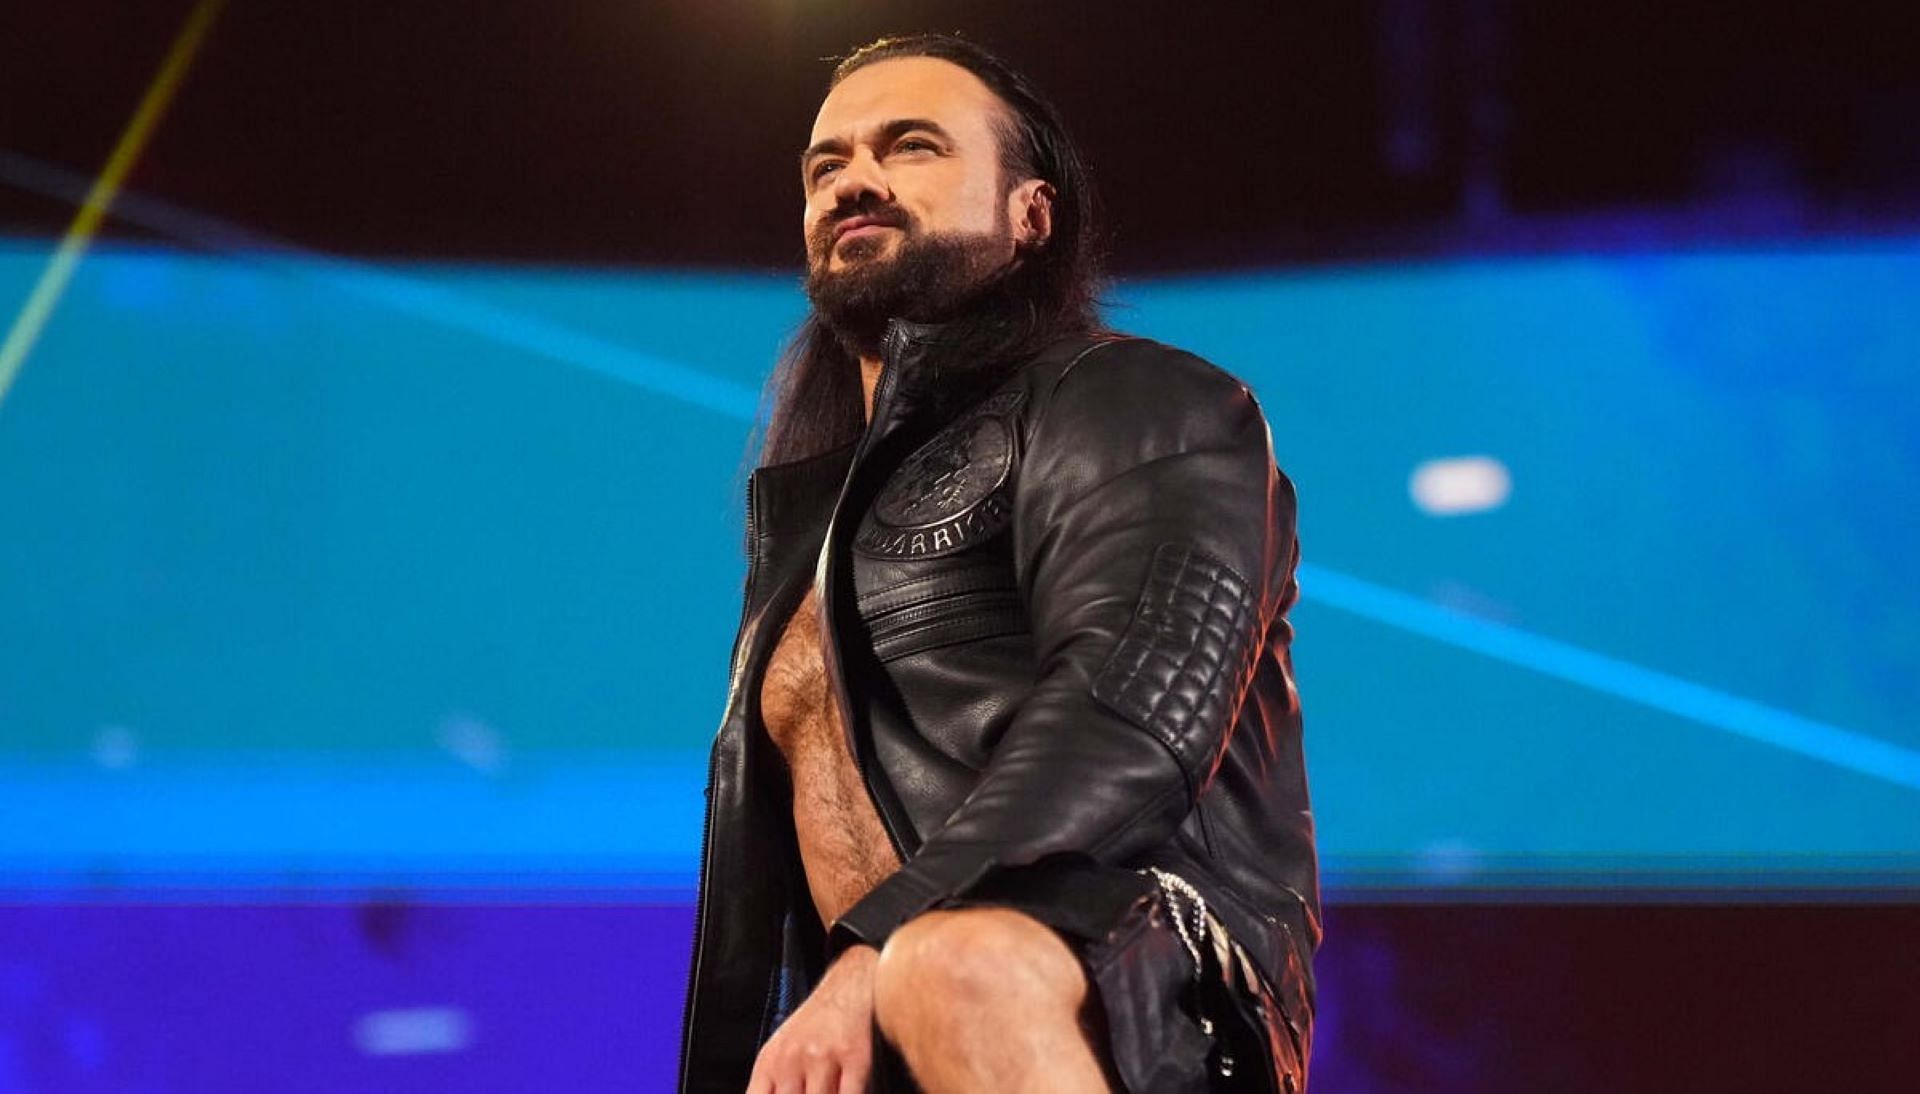 Will Drew McIntyre be smiling after his match at WrestleMania 40?